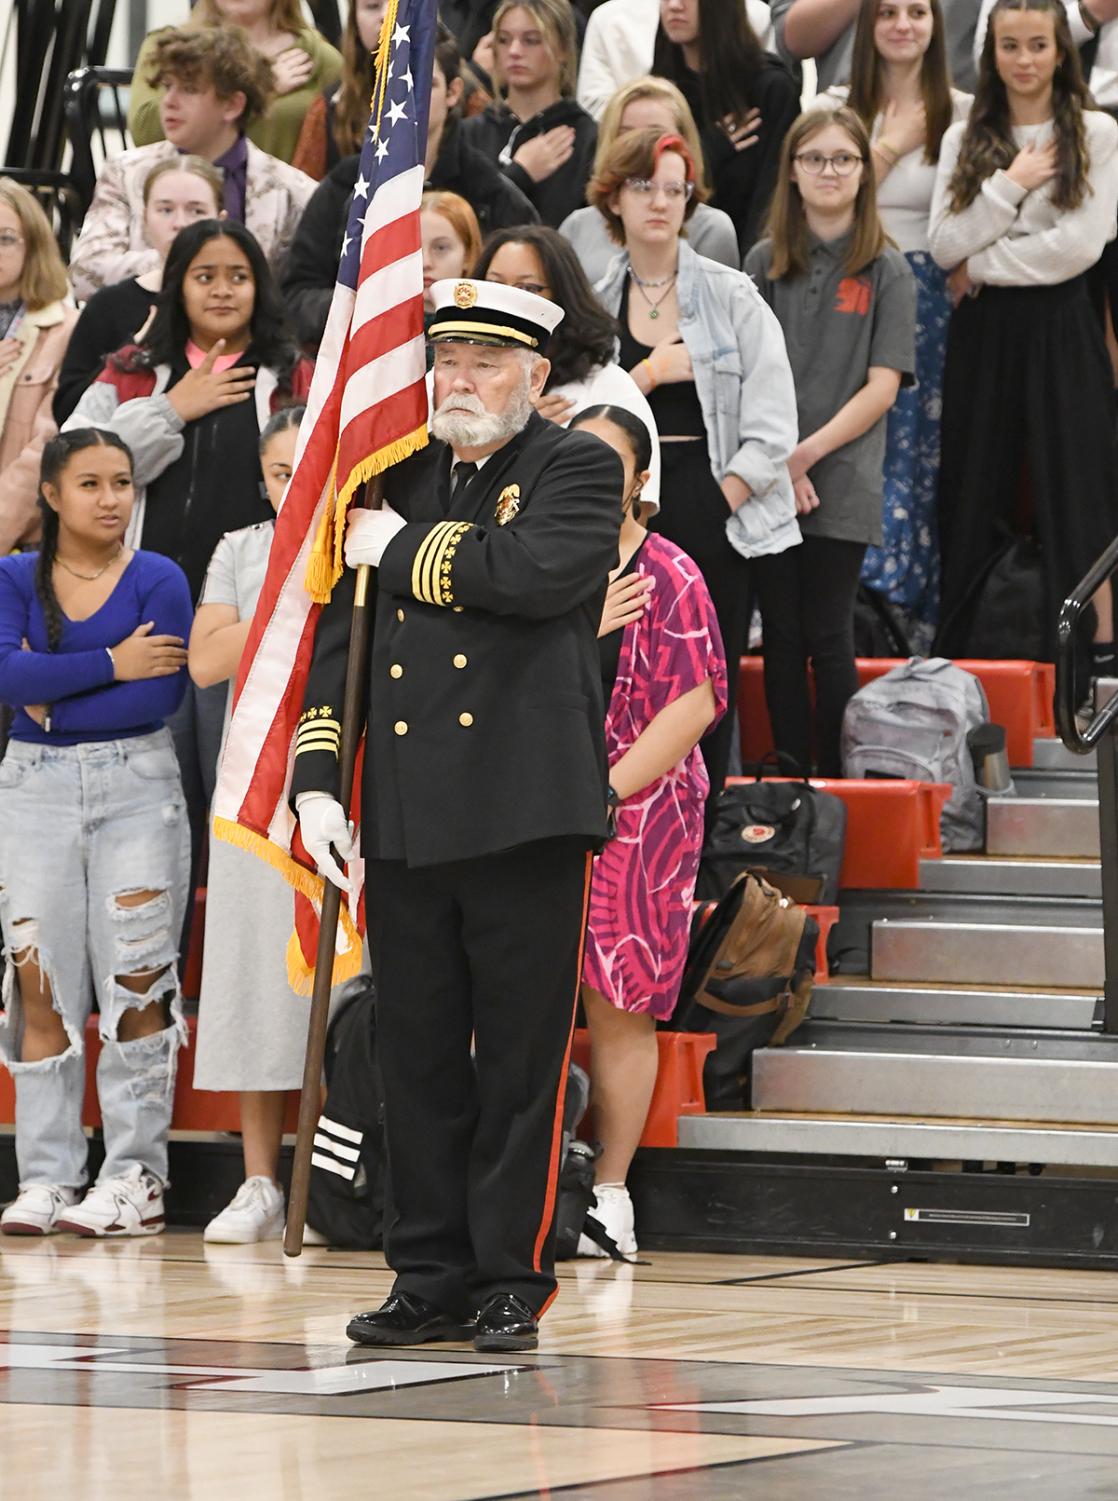 Alta+Honors+Veterans+at+Annual+Assembly